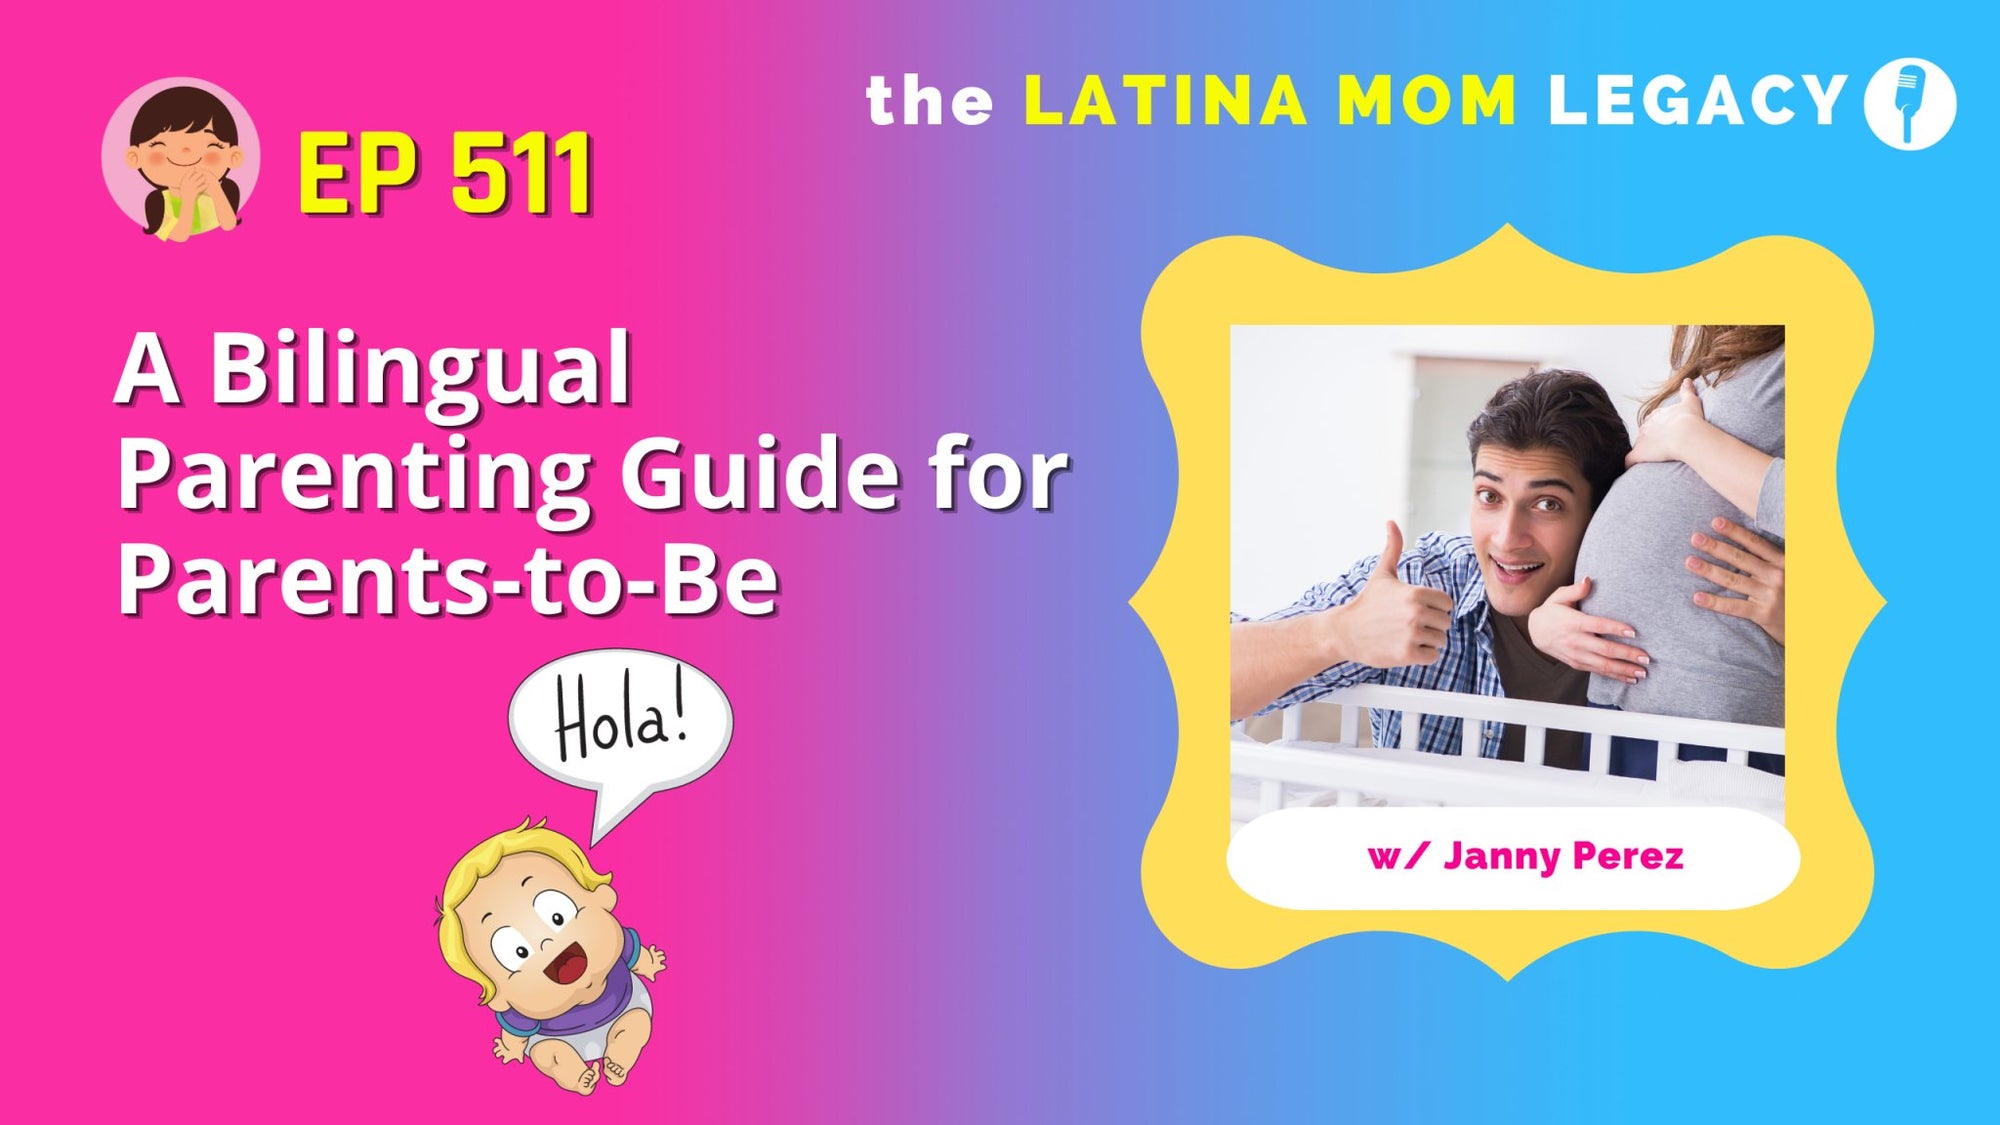 A Bilingual Parenting Guide for Parents-to-Be - Mi LegaSi